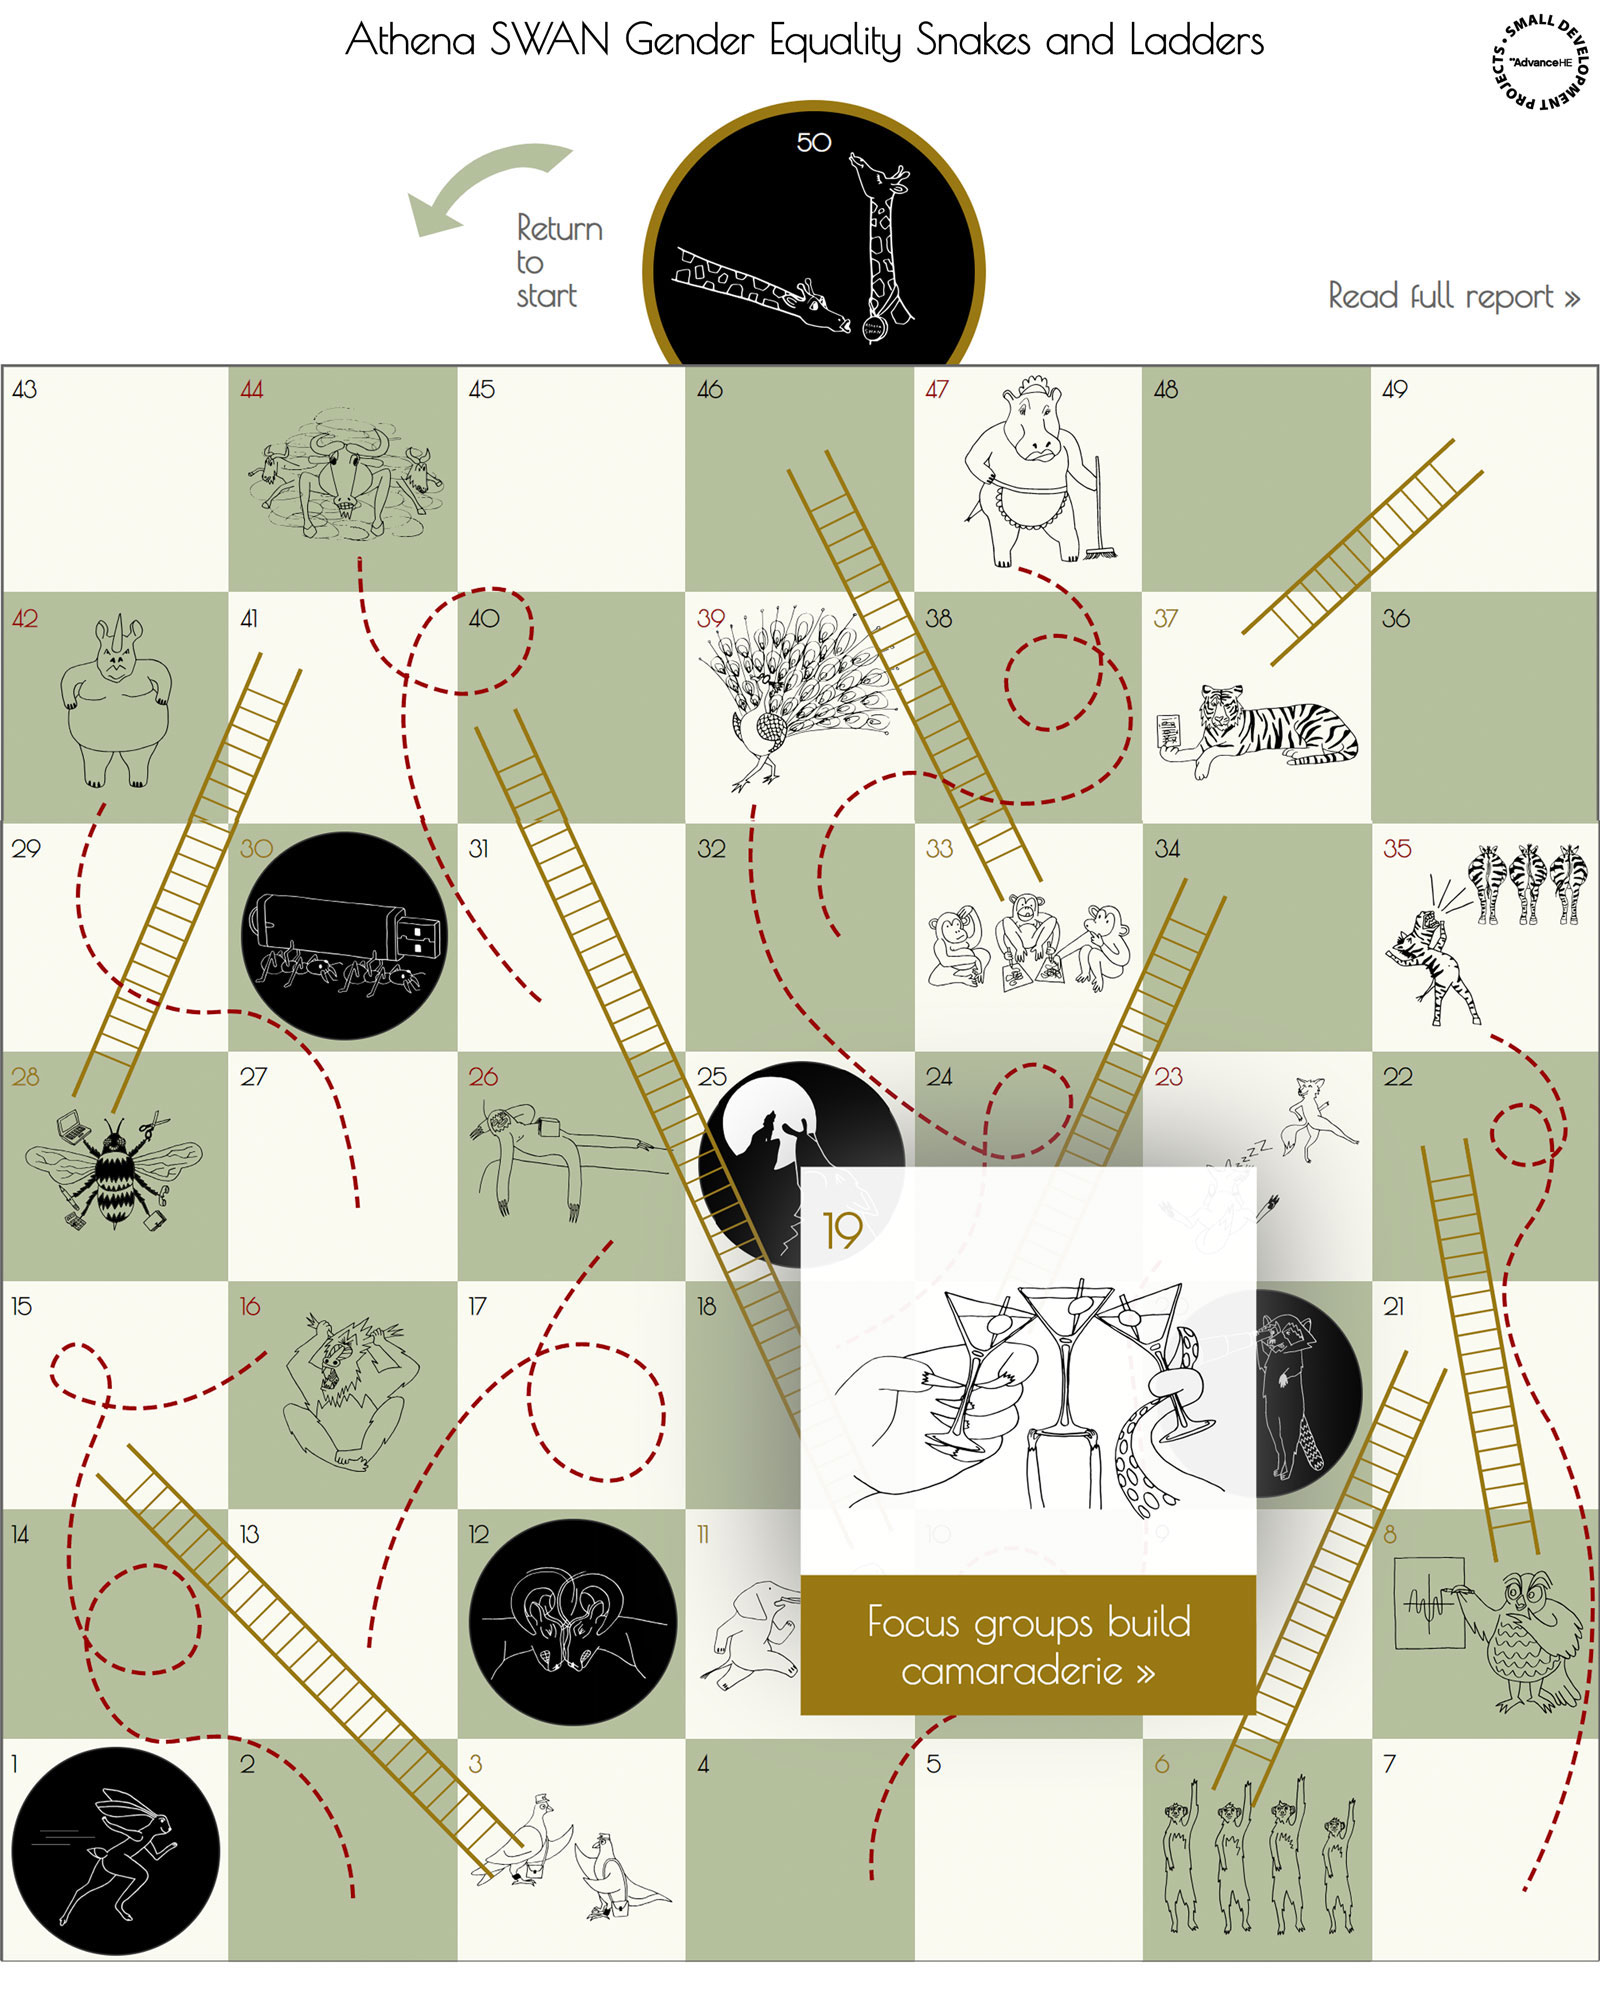 title, snakes and ladders game grid background with hand drawn animal illustrations within some squares, showing example of a modal pop up with enlarged image and accompanying text